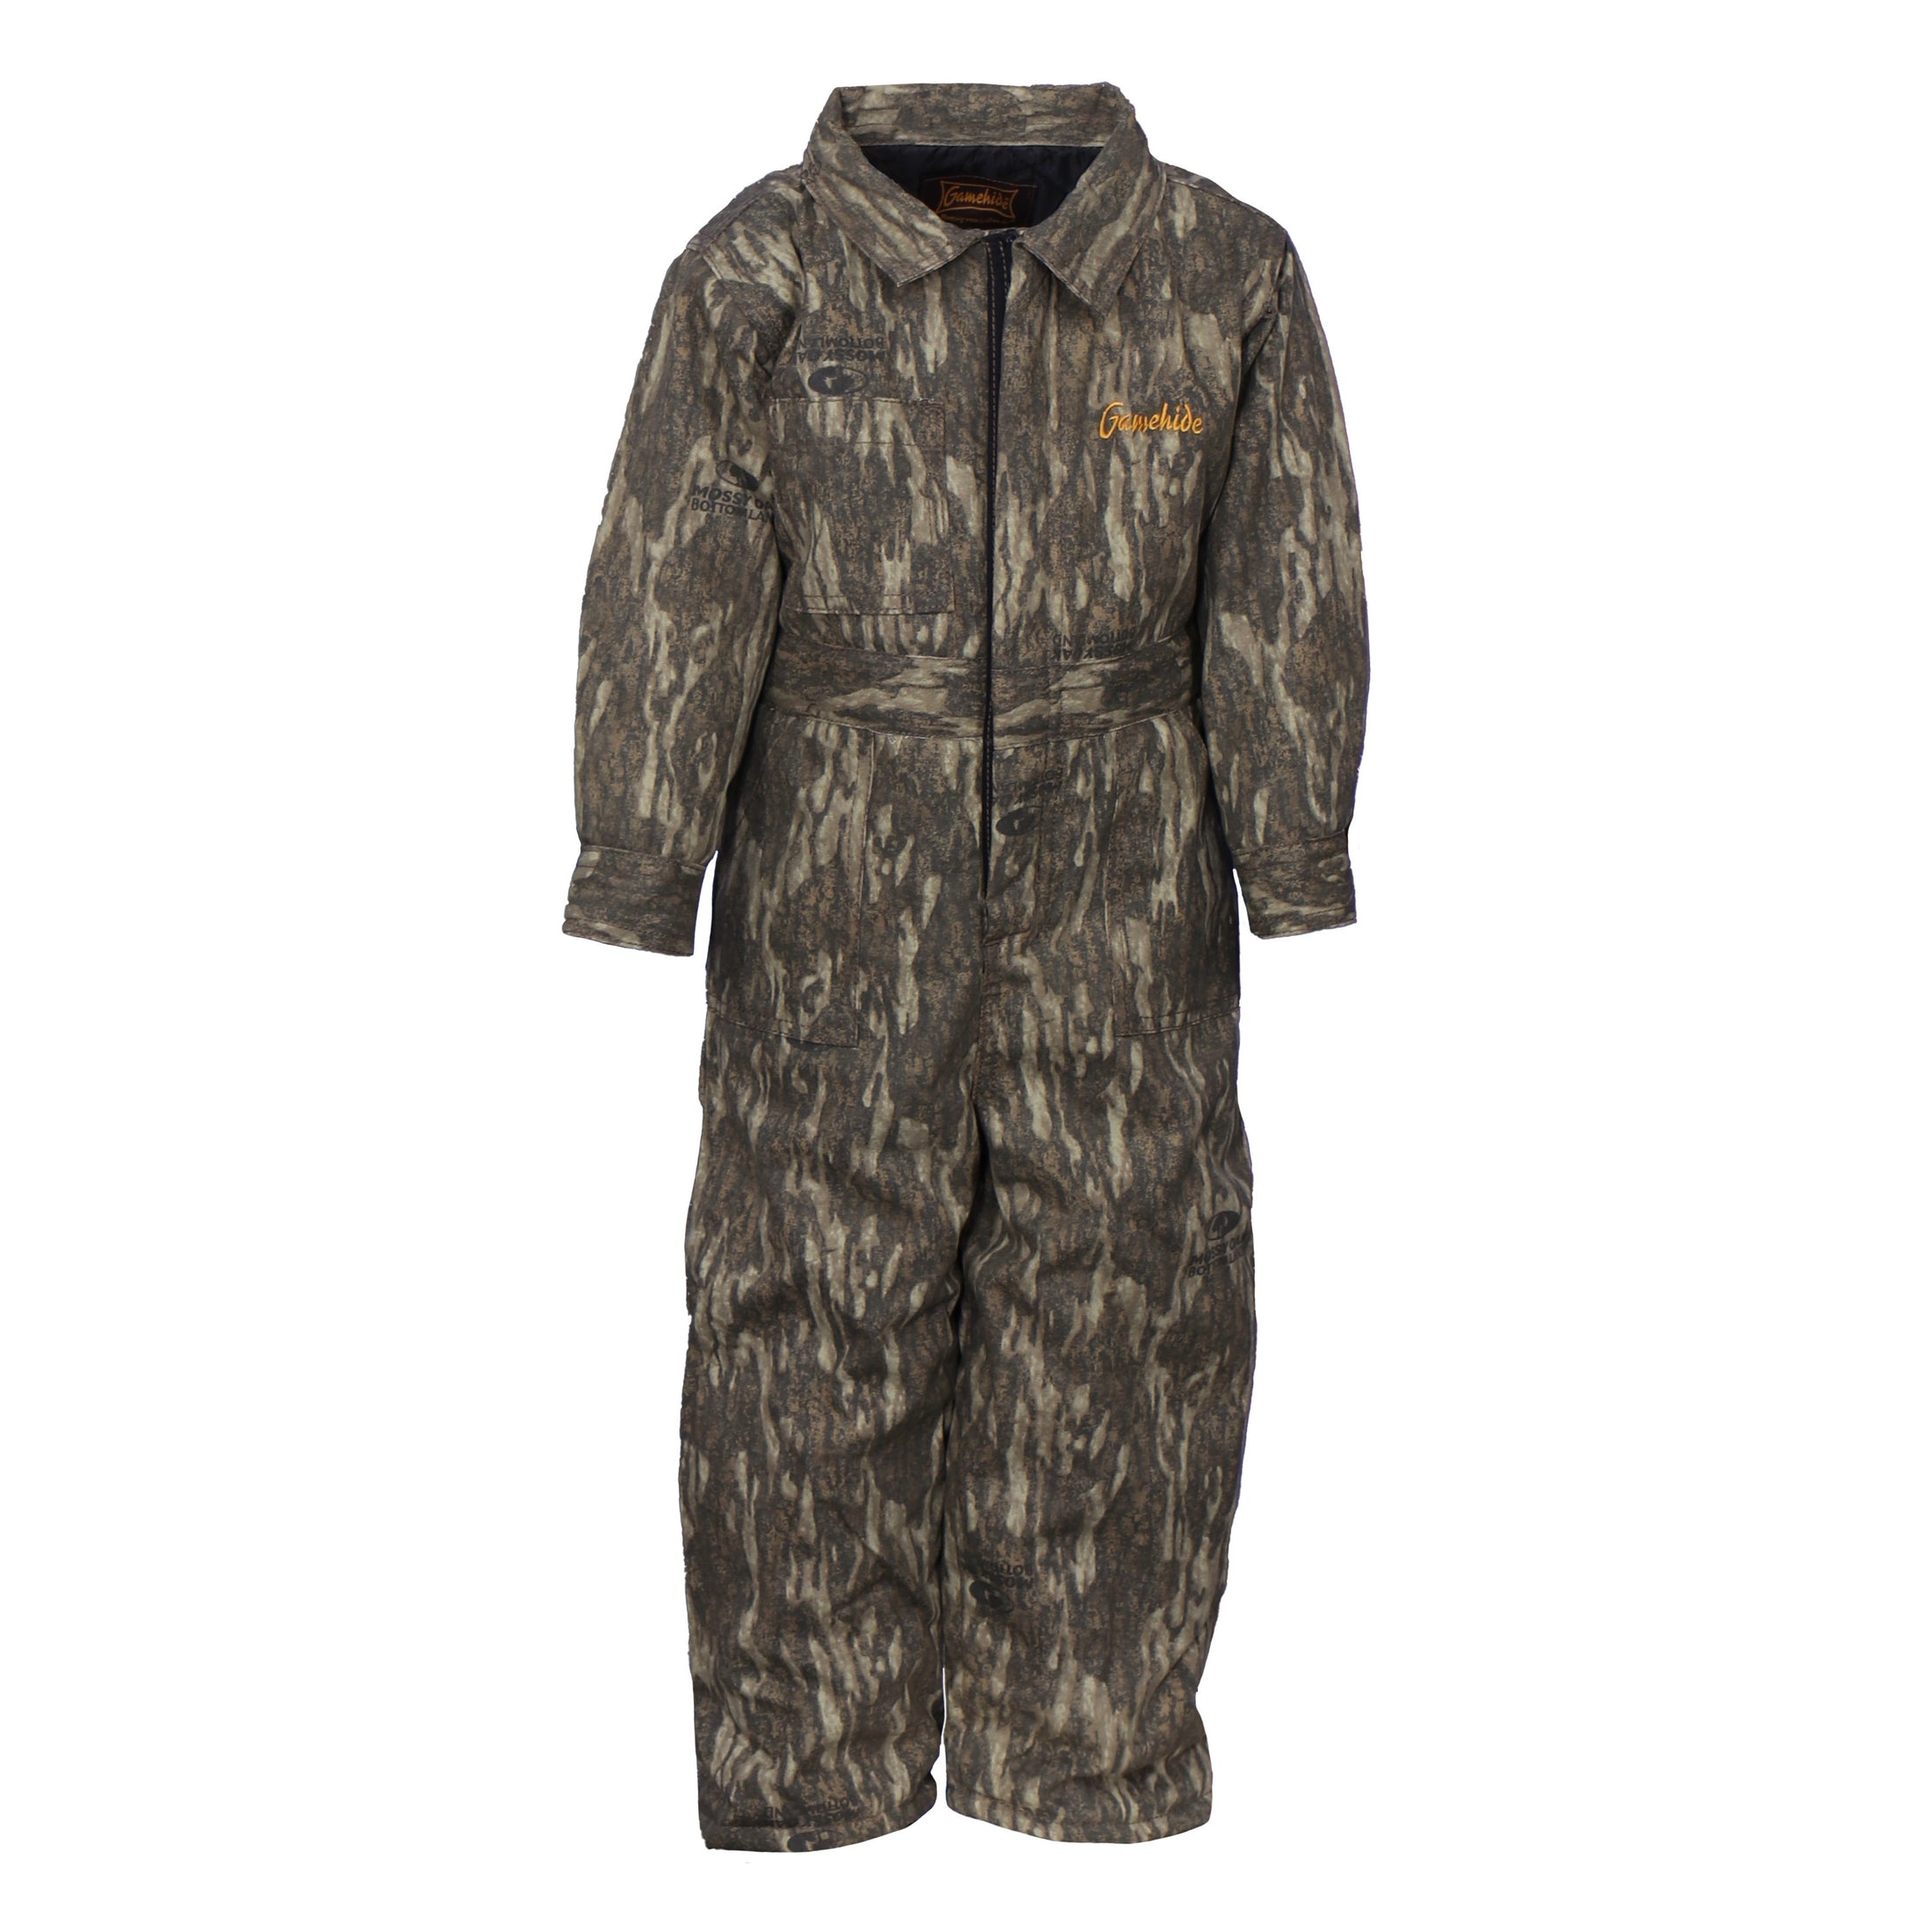 gamehide toddler hunt camp insulated coverall (mossy oak new bottomland)